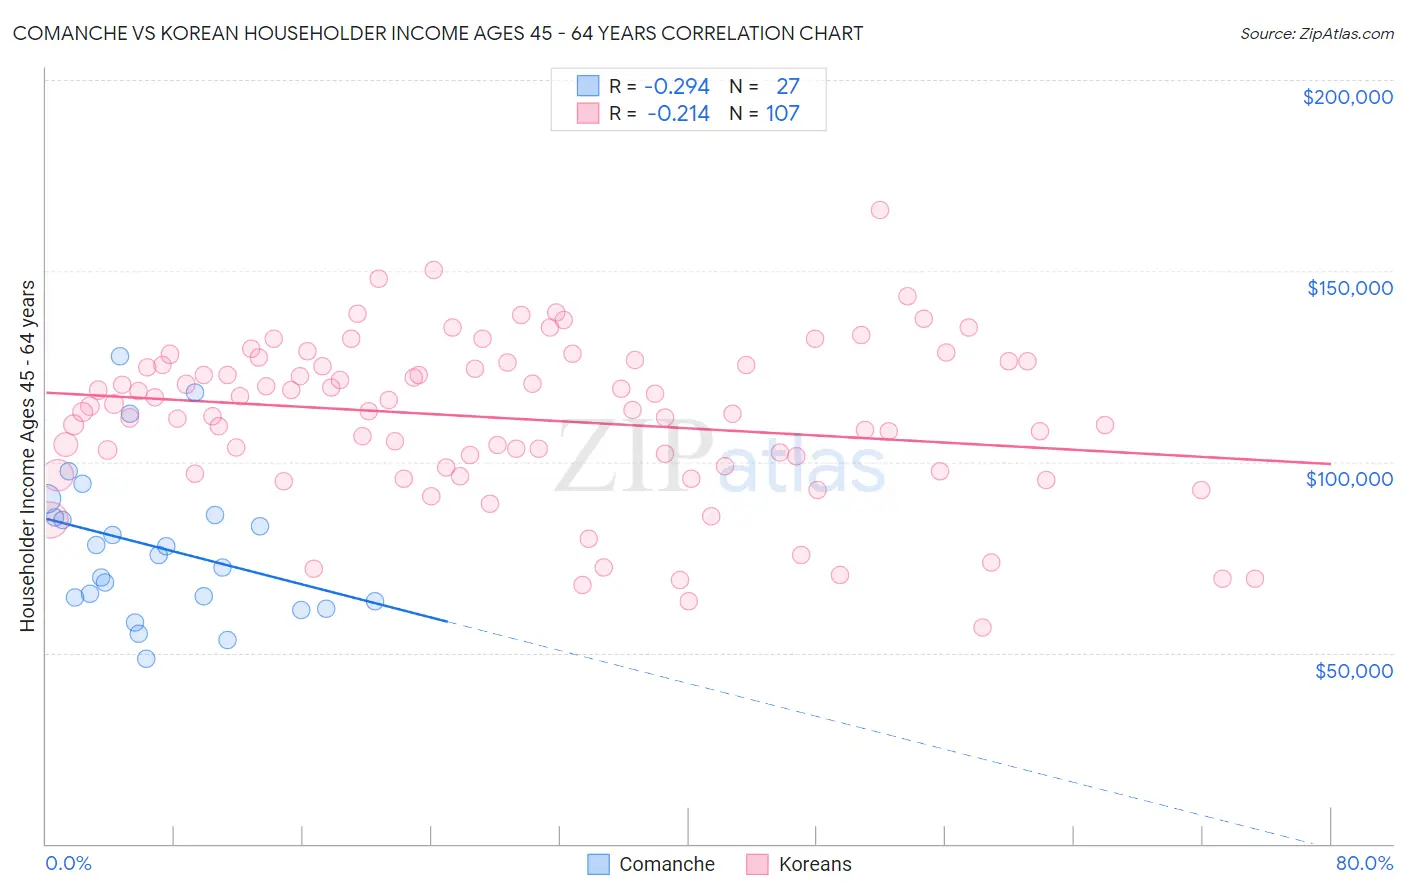 Comanche vs Korean Householder Income Ages 45 - 64 years